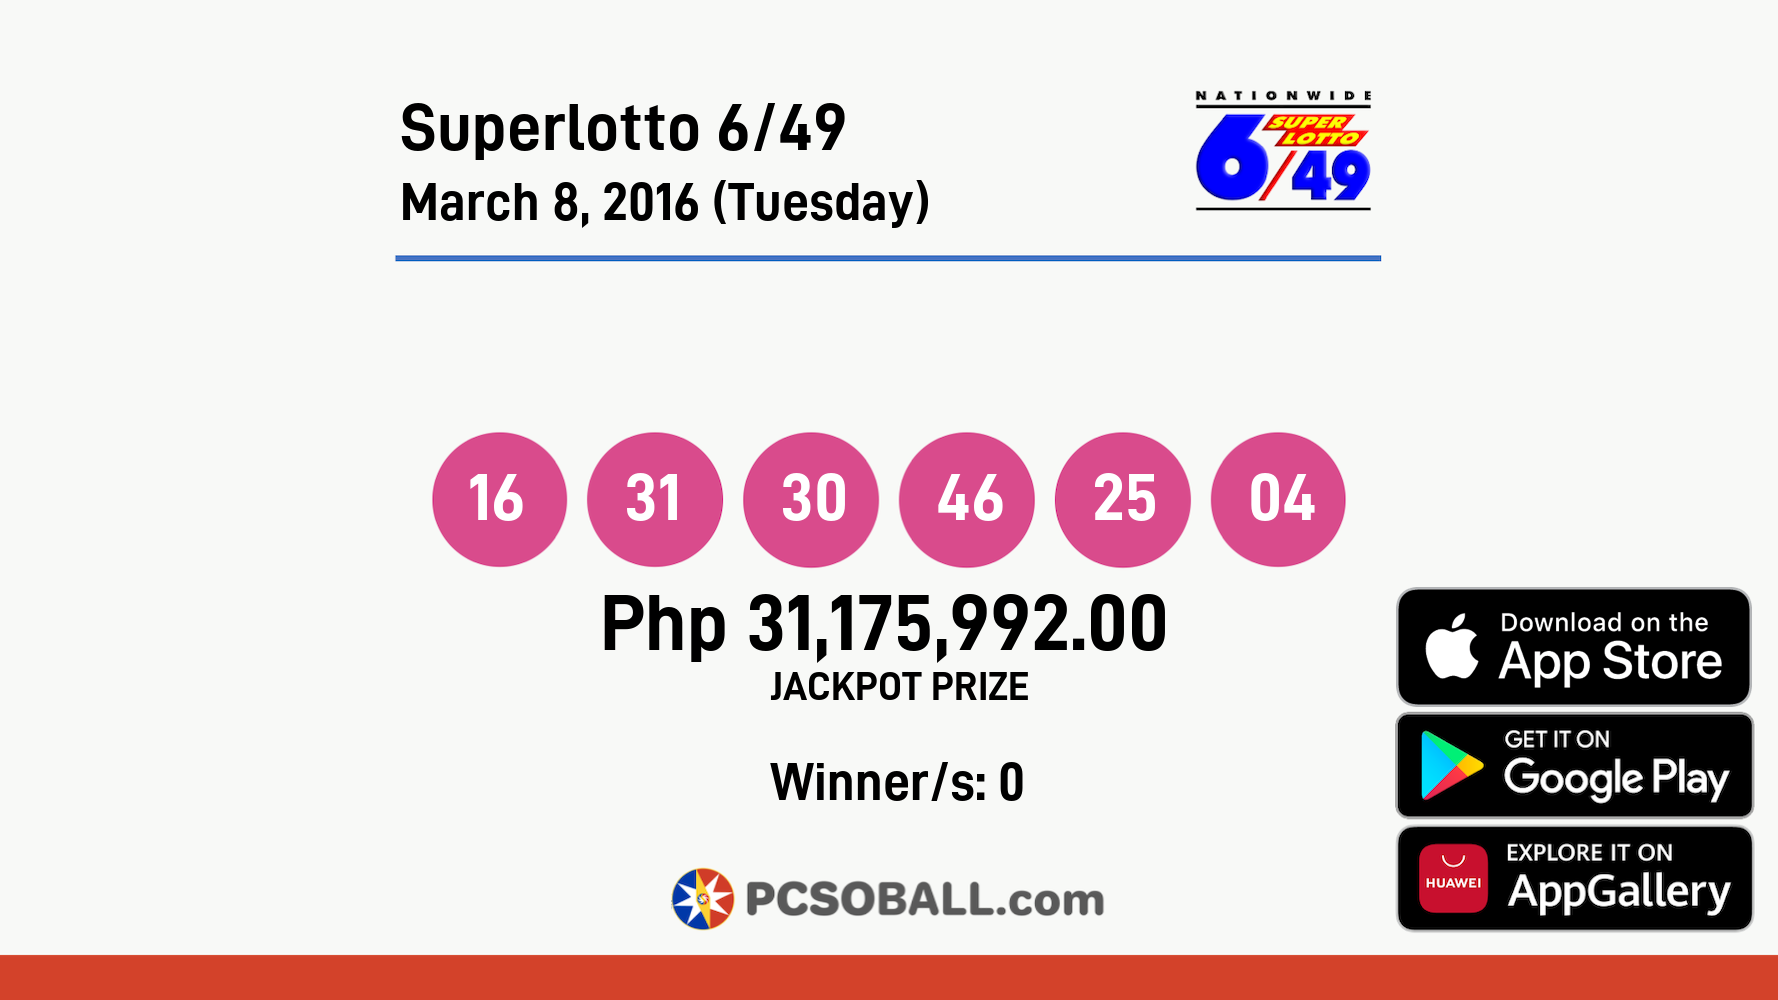 Superlotto 6/49 March 8, 2016 (Tuesday) Result